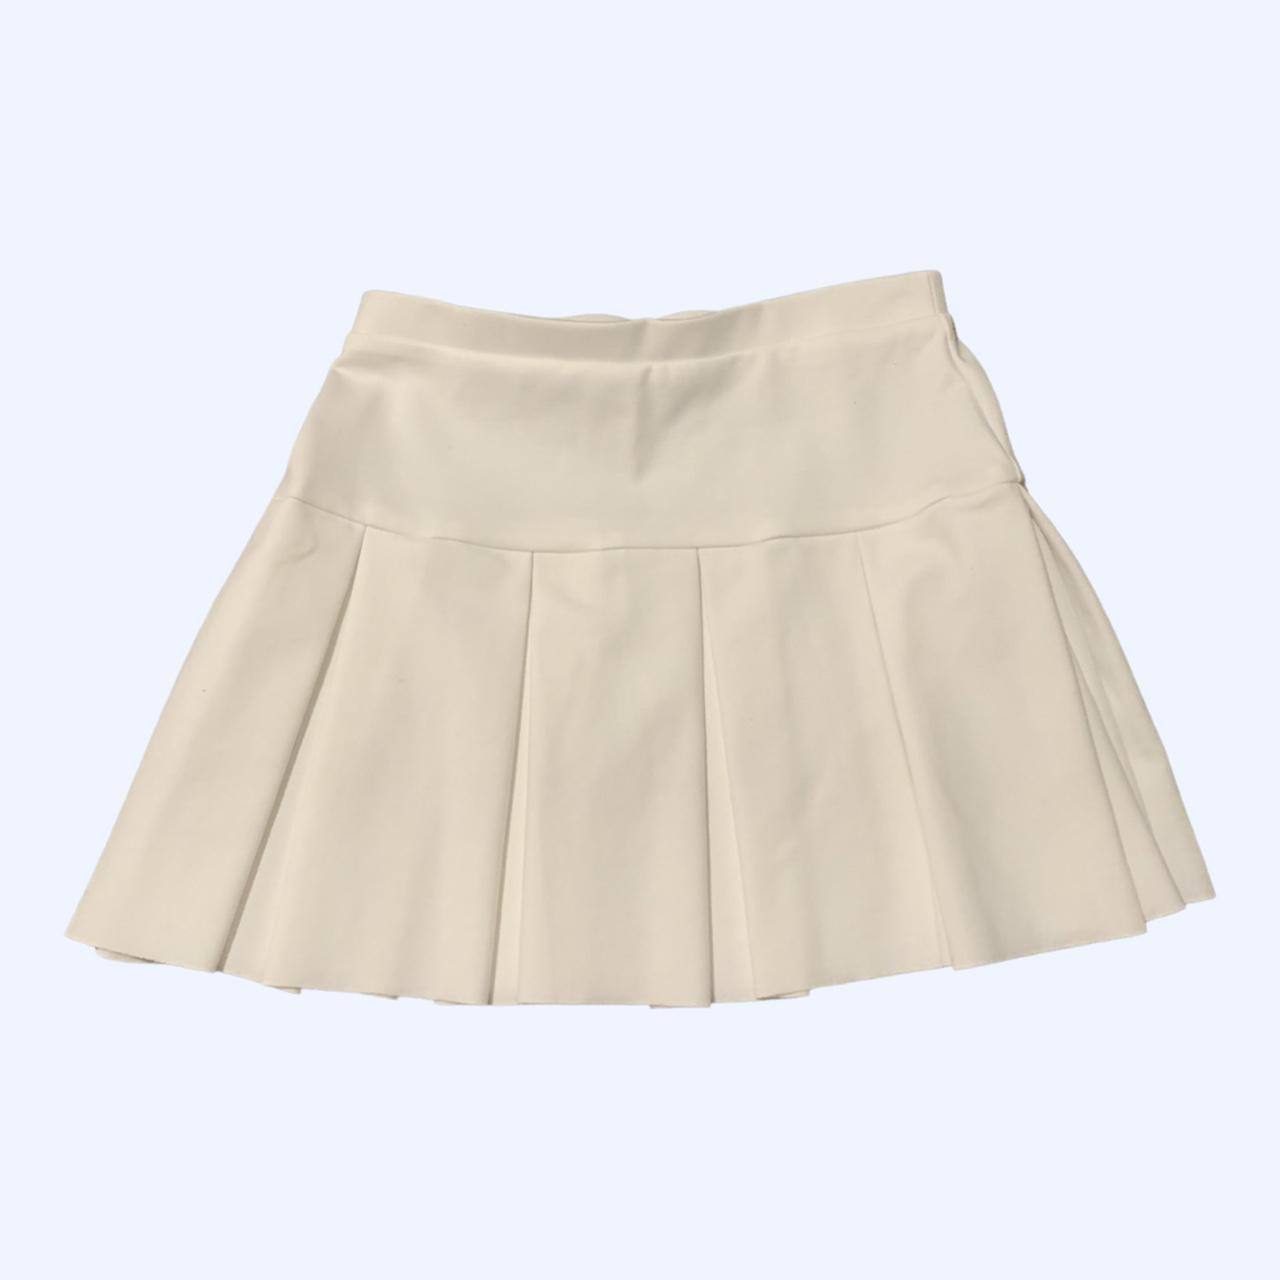 White lioness pleated tennis skirt 2000s Y2K 90s... - Depop